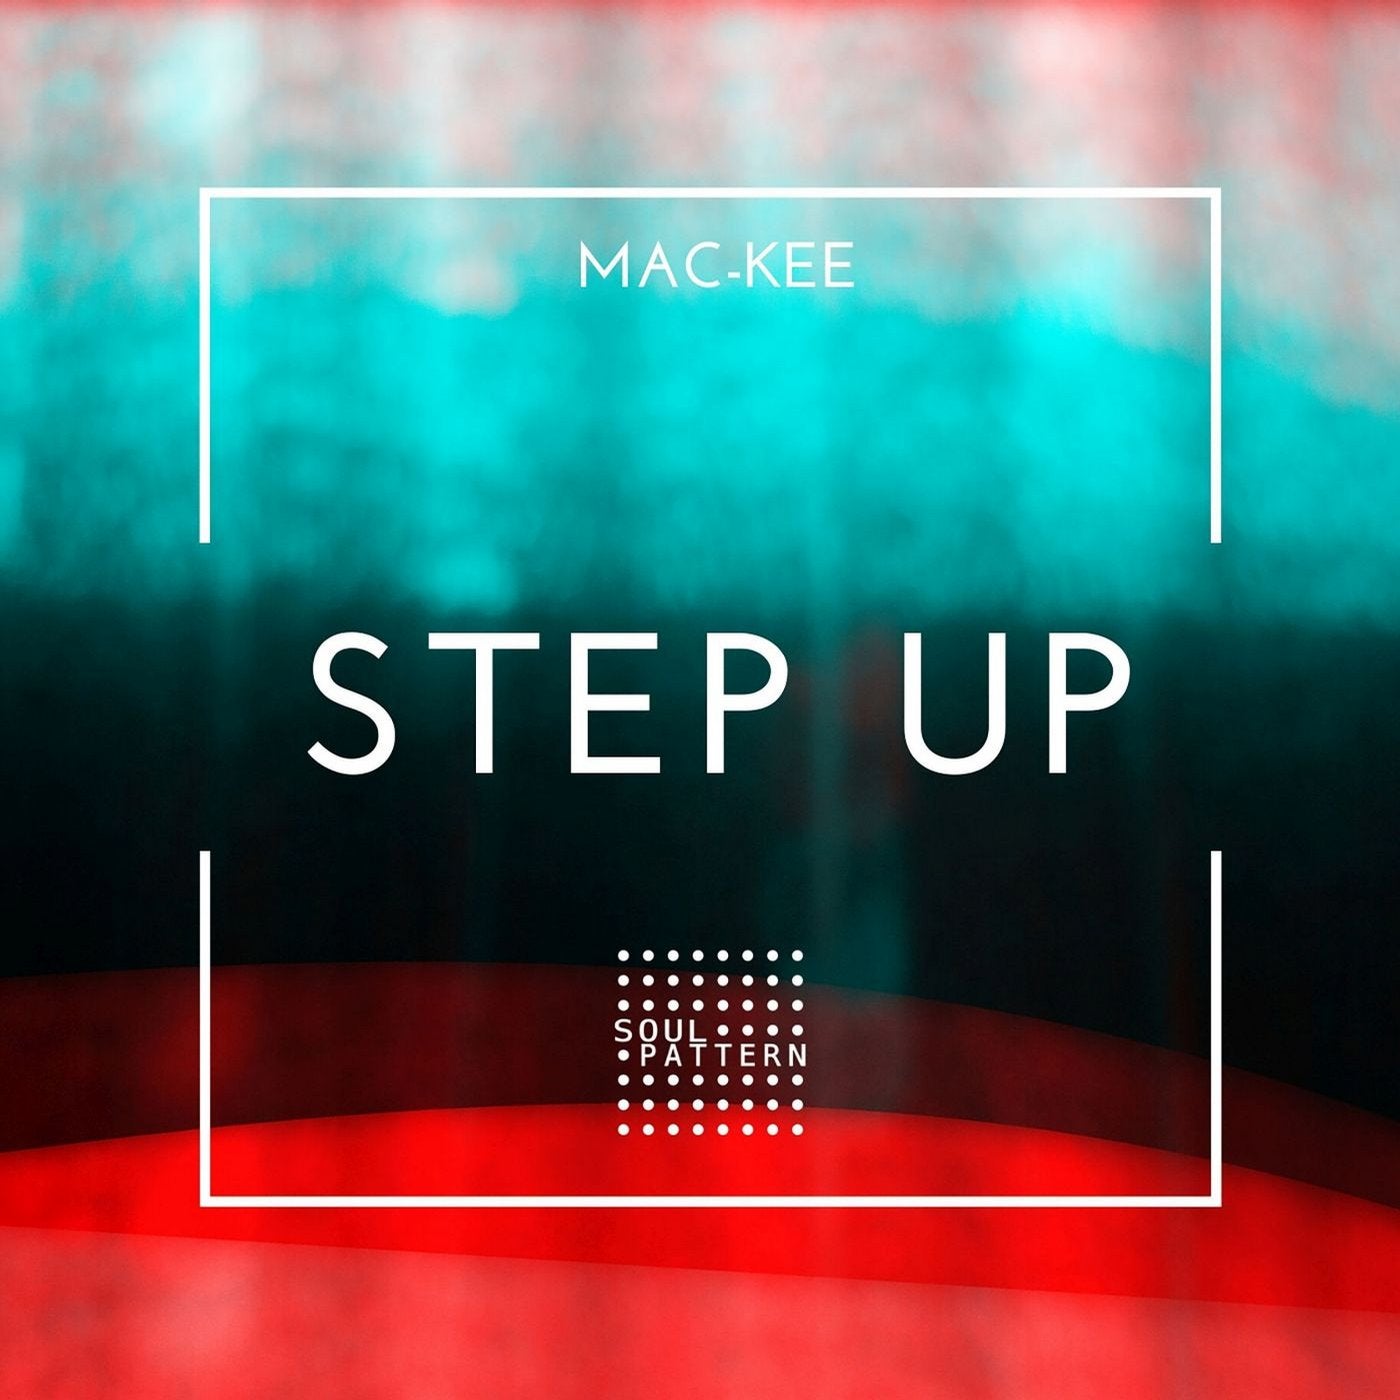 Step Up (Original Mix) by Mac-Kee on Beatport